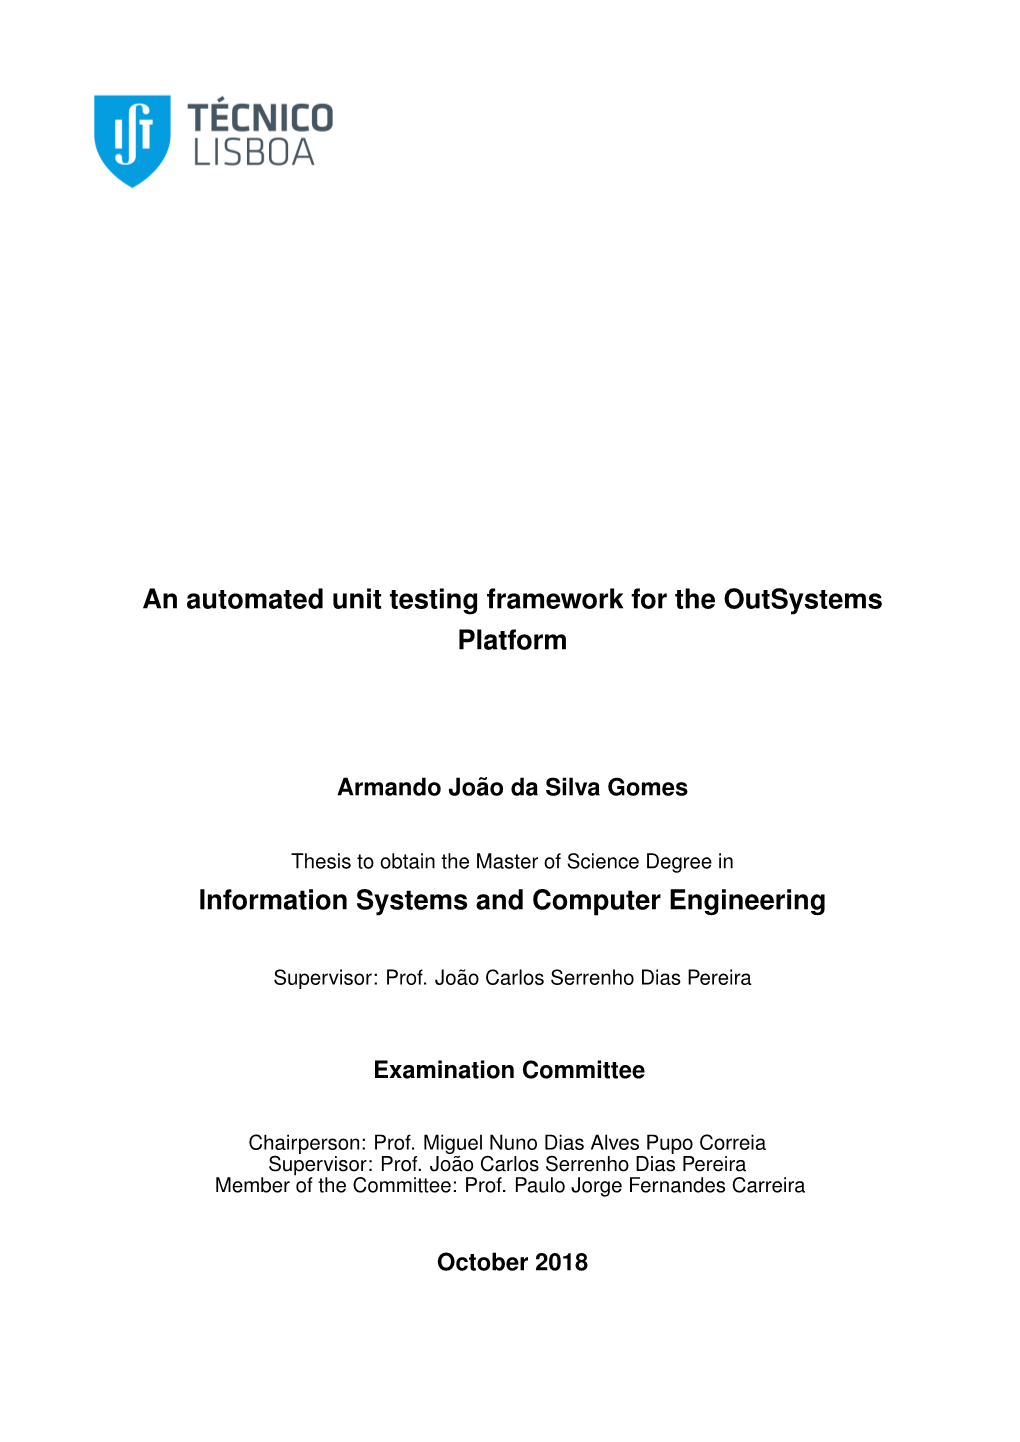 An Automated Unit Testing Framework for the Outsystems Platform